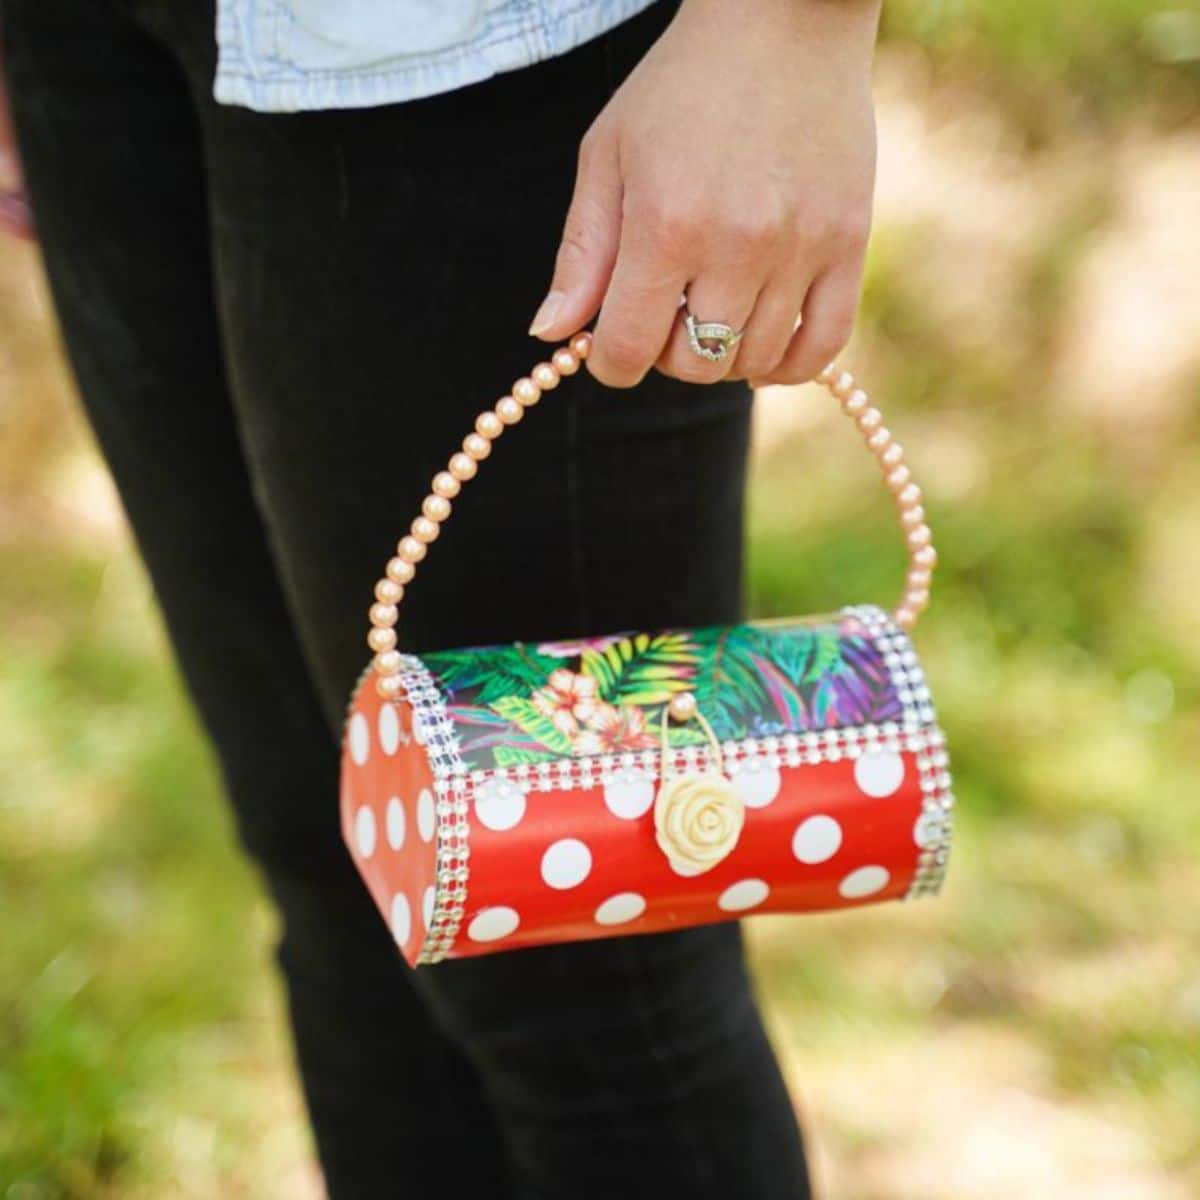 How to Make a Bag/purse Out of Recycled Plastic Bottles - Handbags